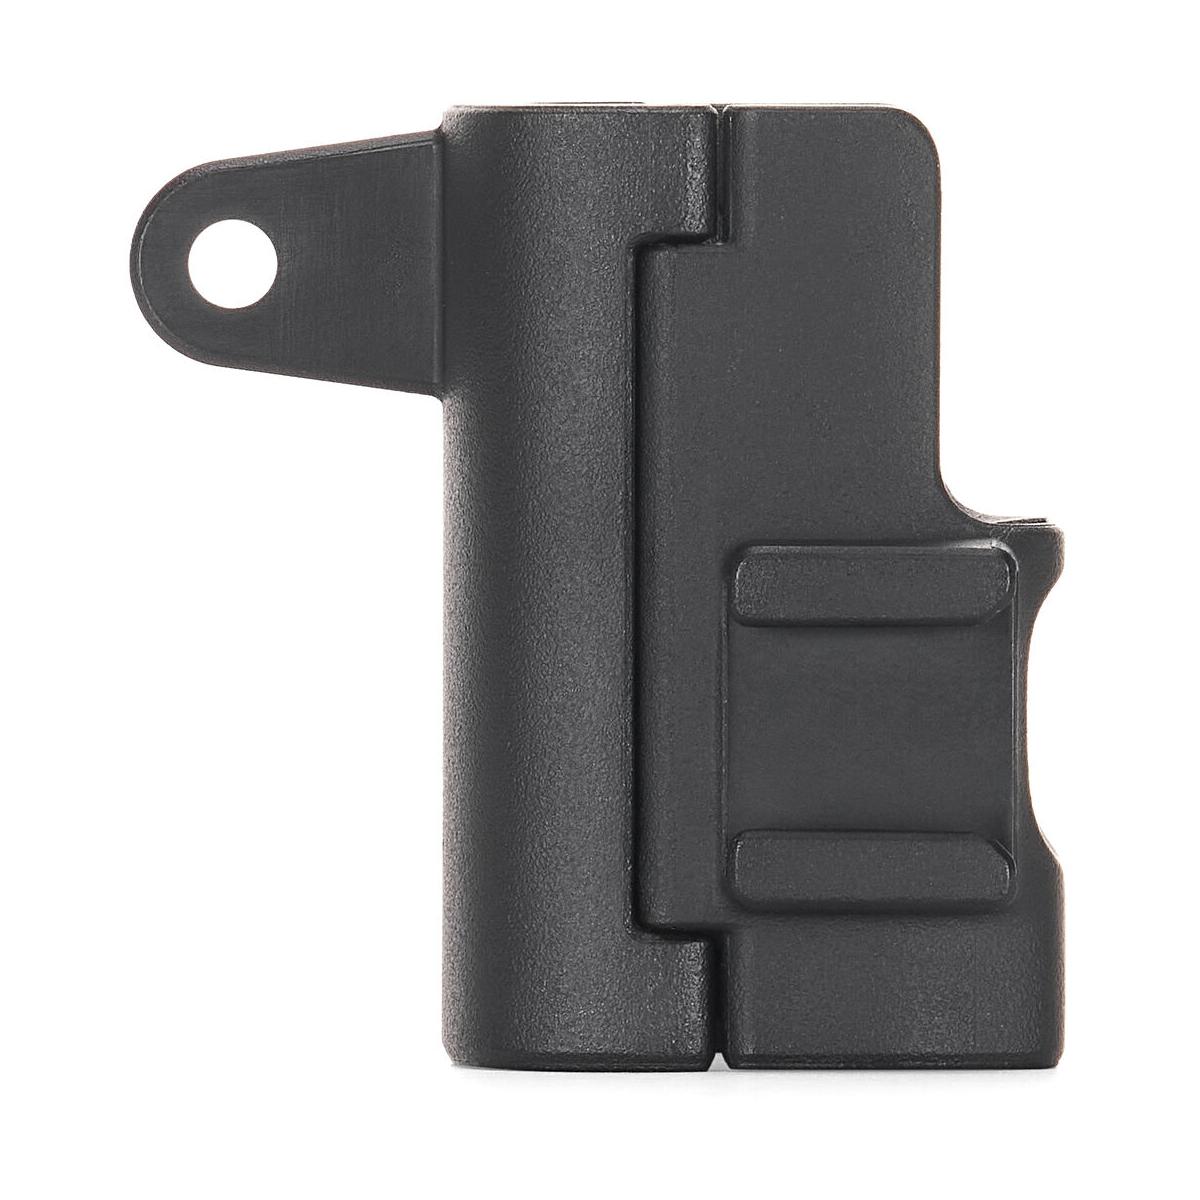 DJI Expansion Adapter for Osmo Pocket 3